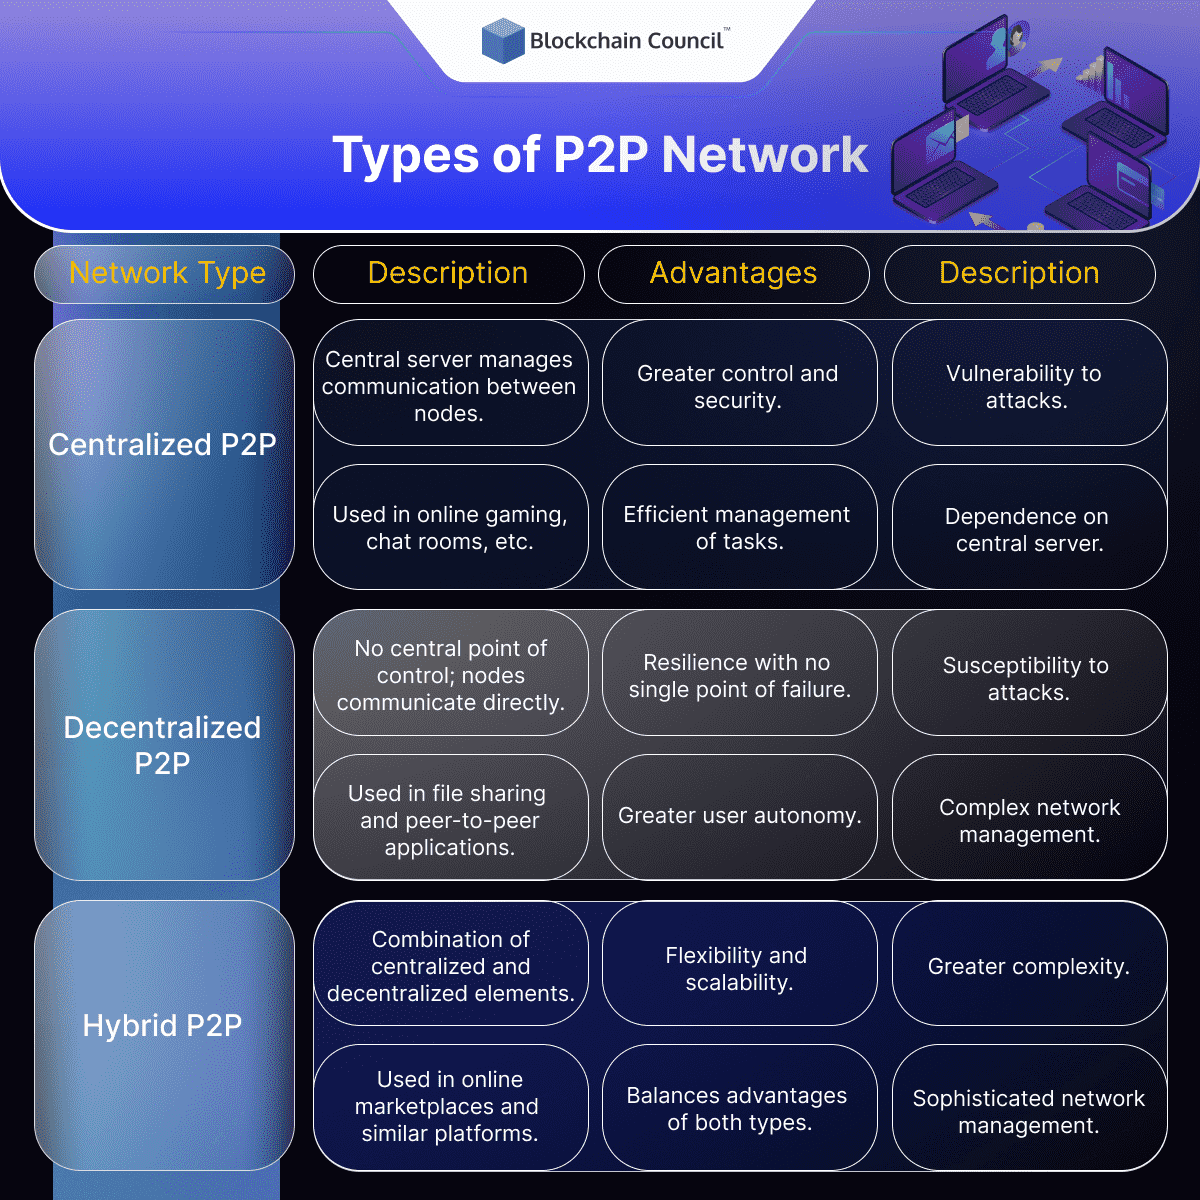 Types of P2P Network